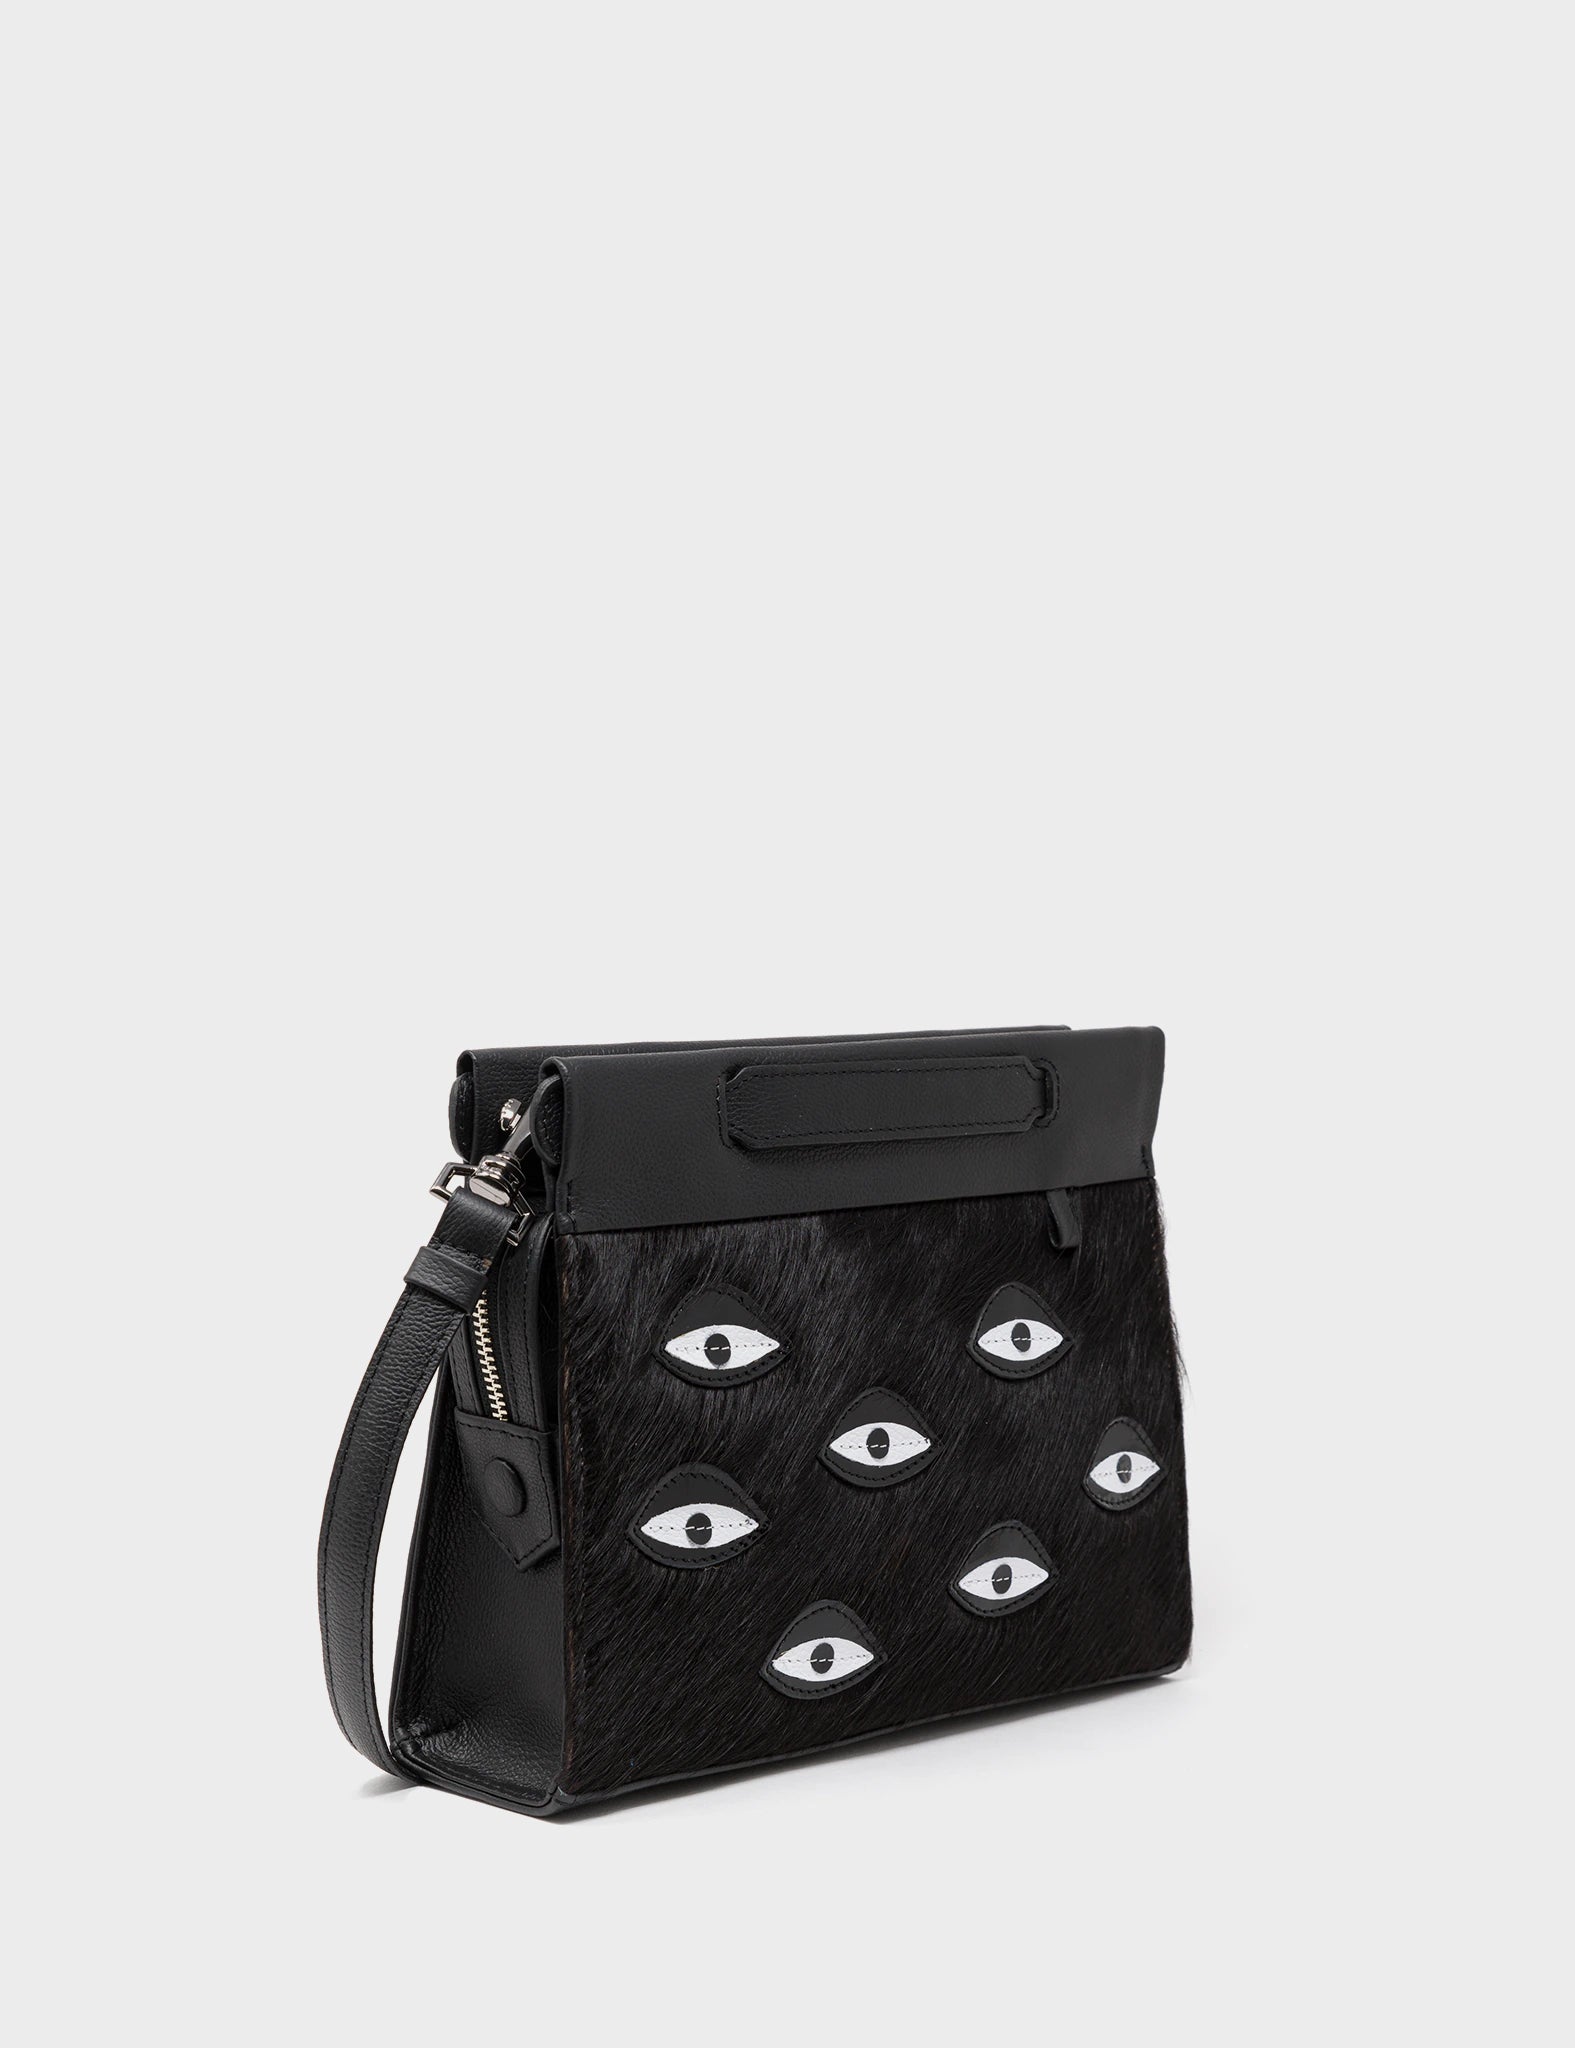 Vali Crossbody Small Black Leather Bag - Eyes Applique Adjustable Handle - Front corner angle view 